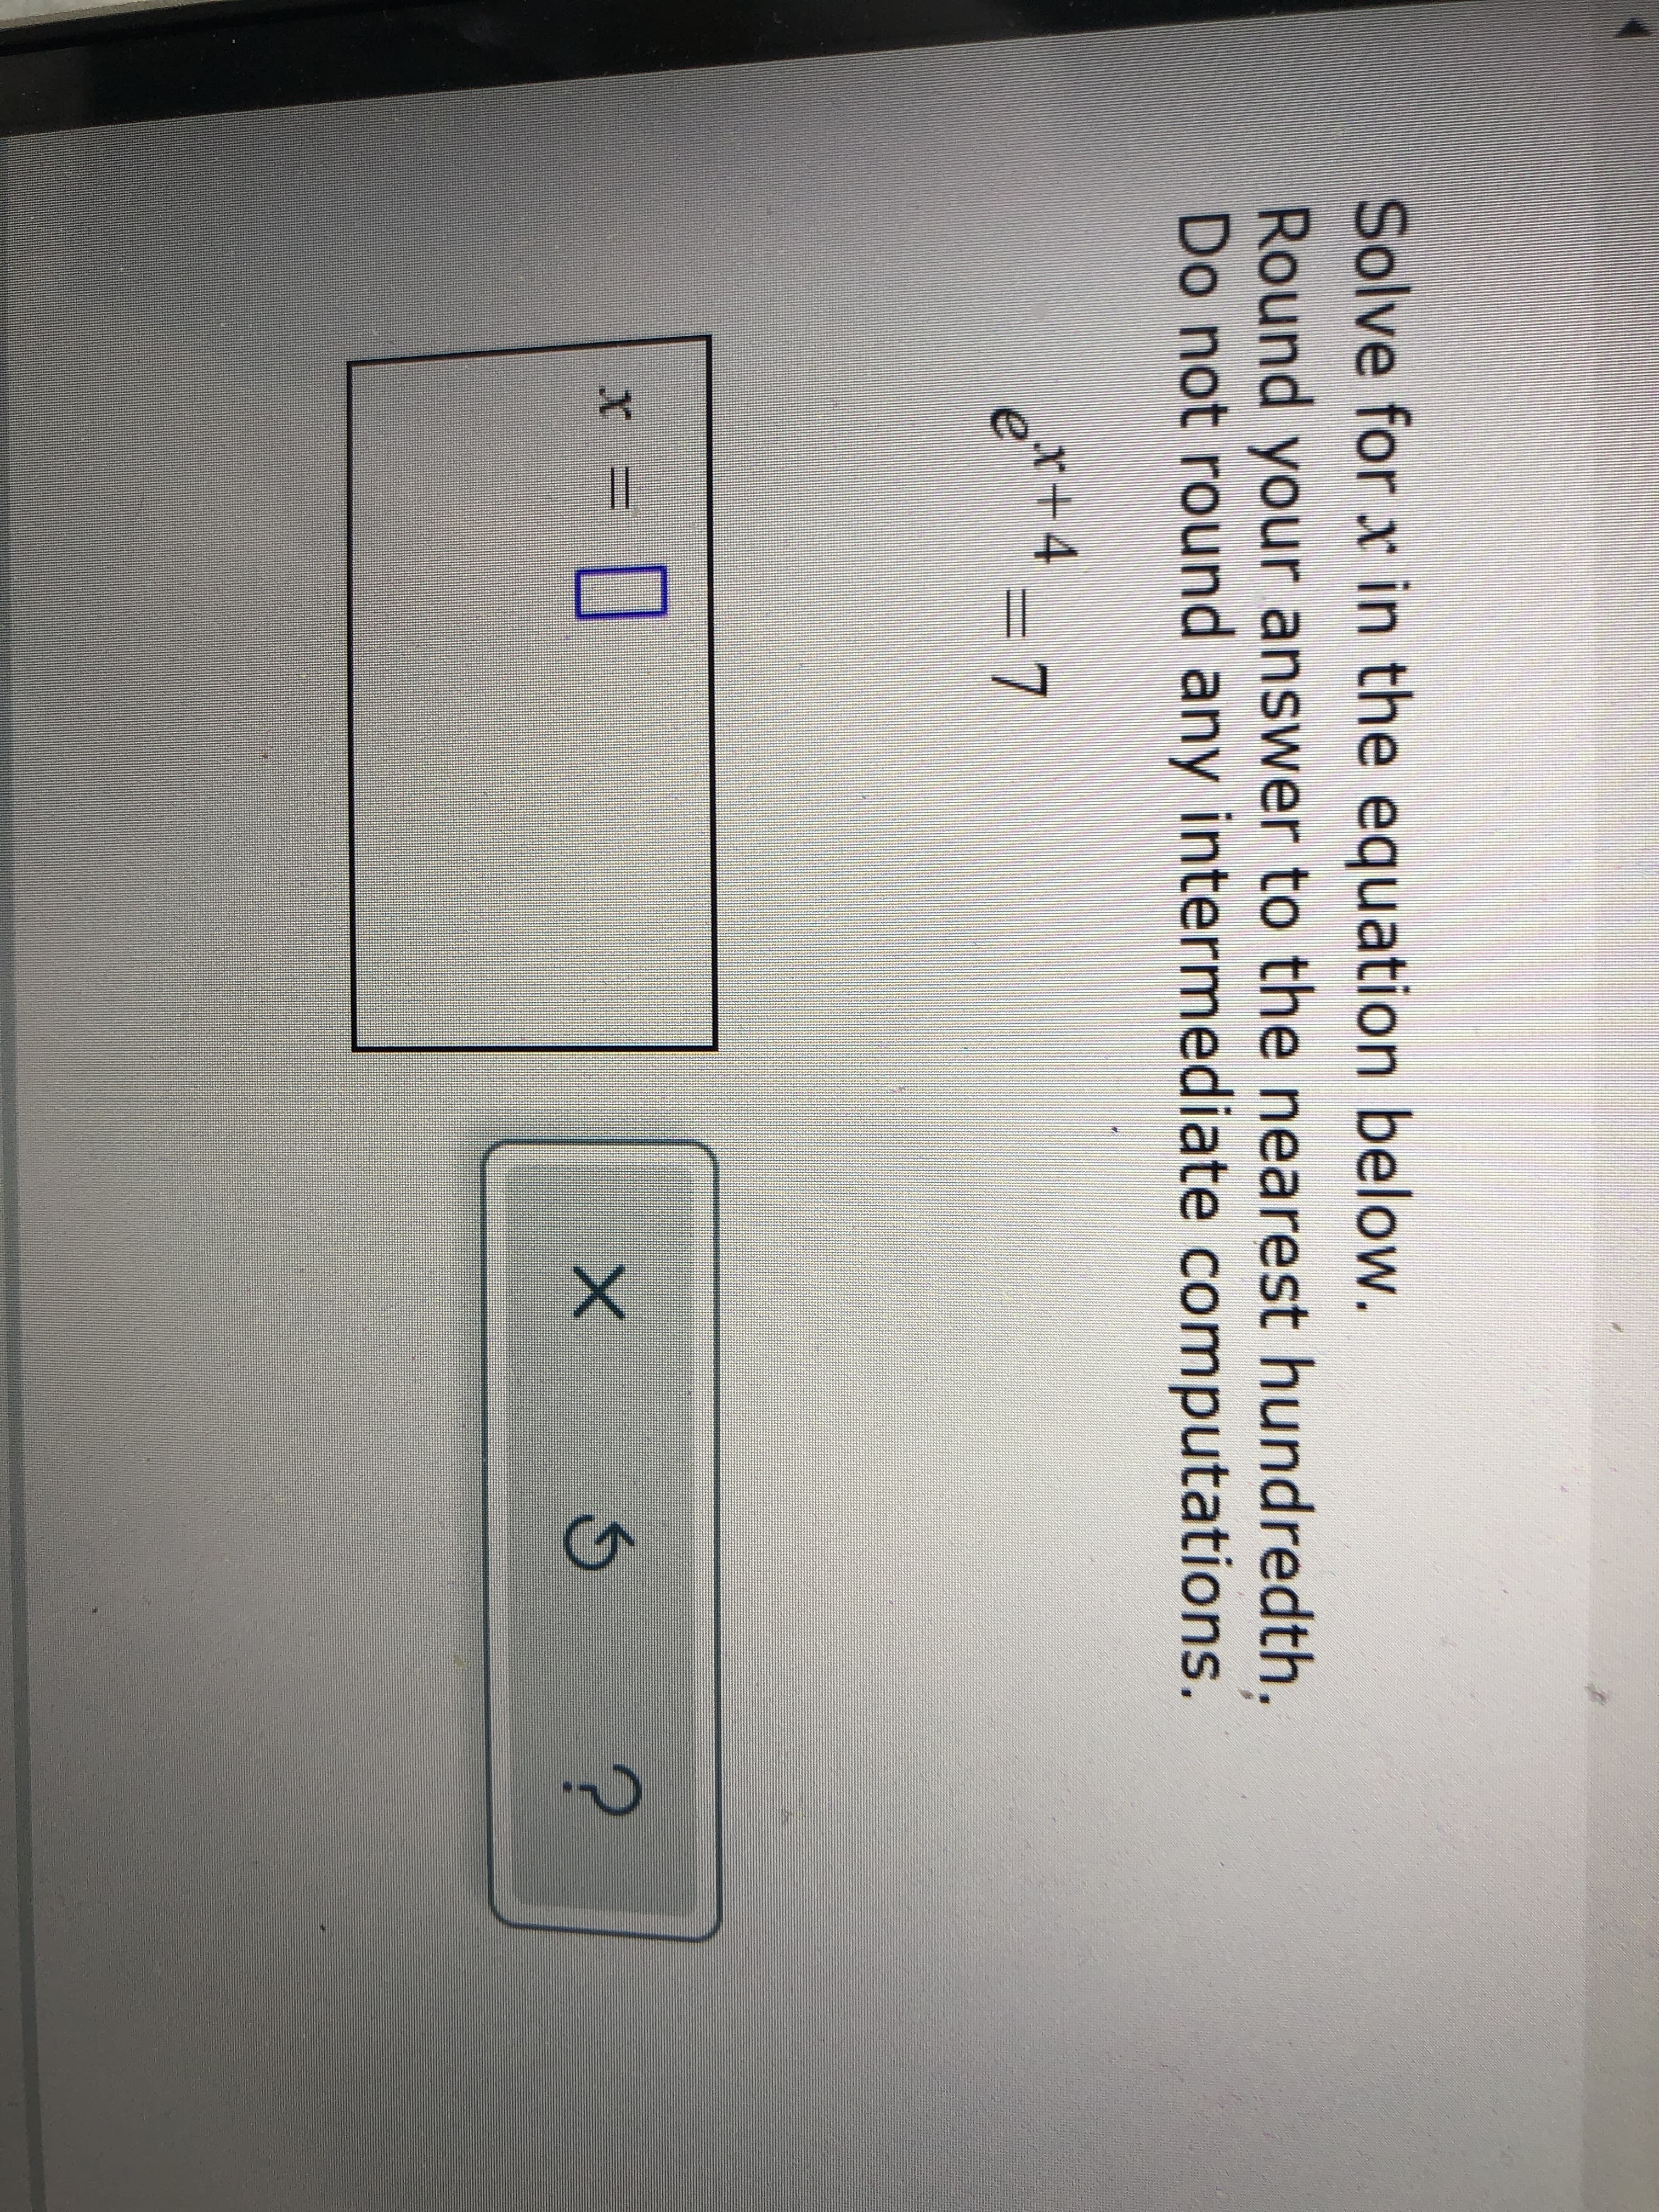 Solve for x in the equation below.
Round your answer to the nearest hundredth.
Do not round any intermediate computations.
x+4-7
